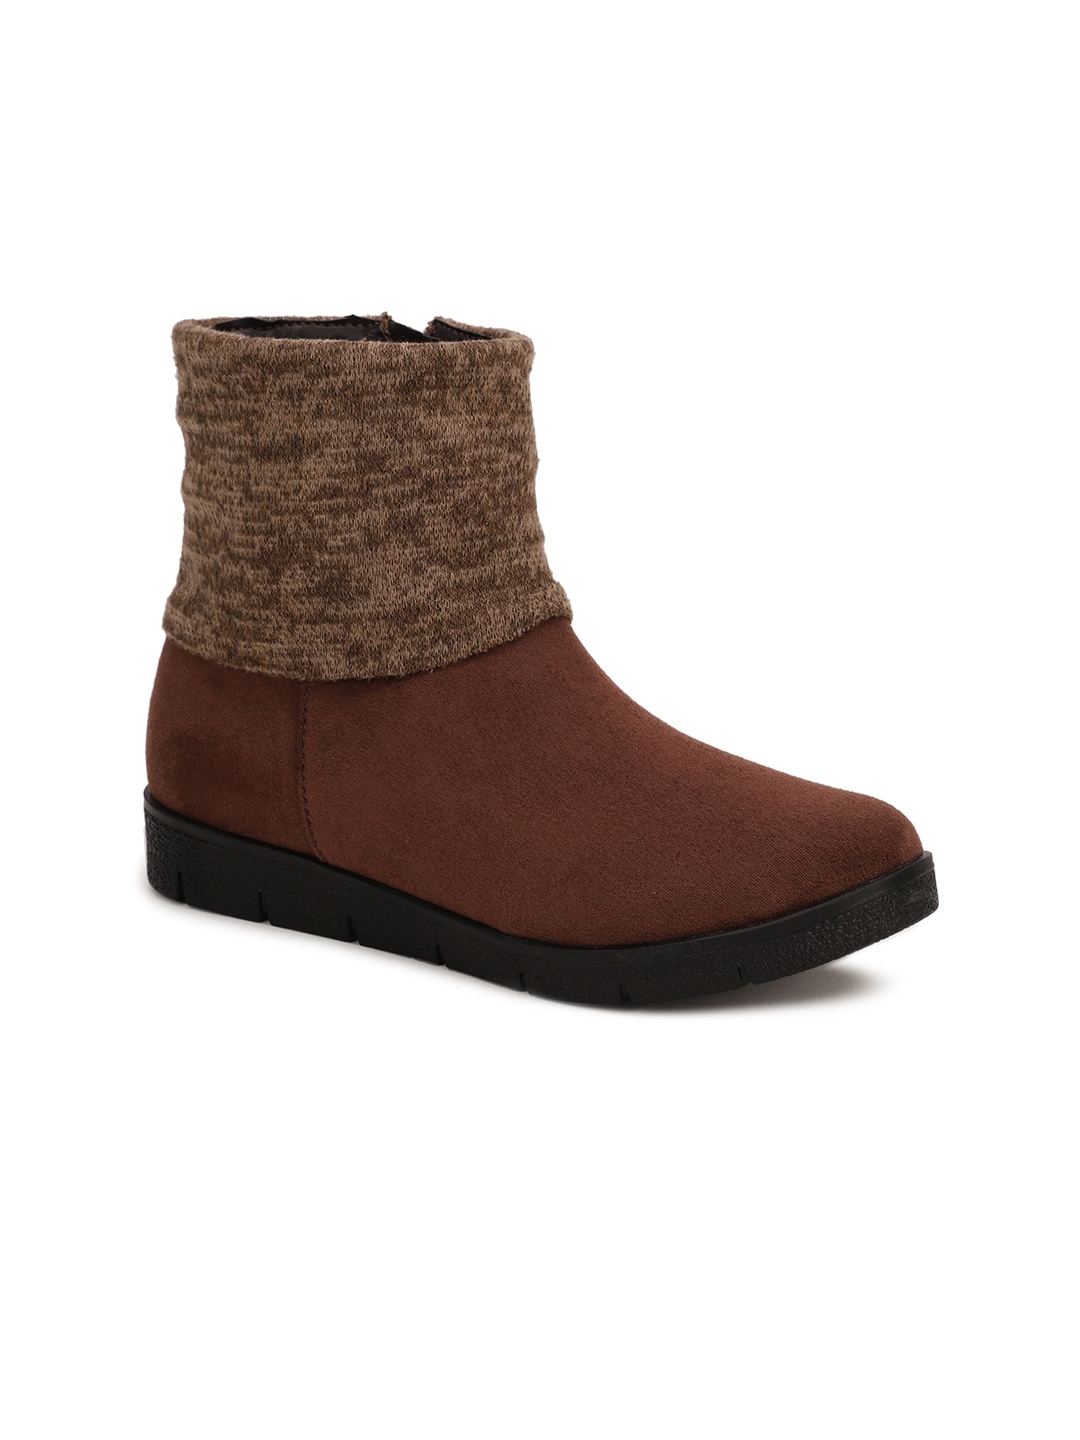 Bruno Manetti Women Brown Textured Suede Flat Boots Price in India